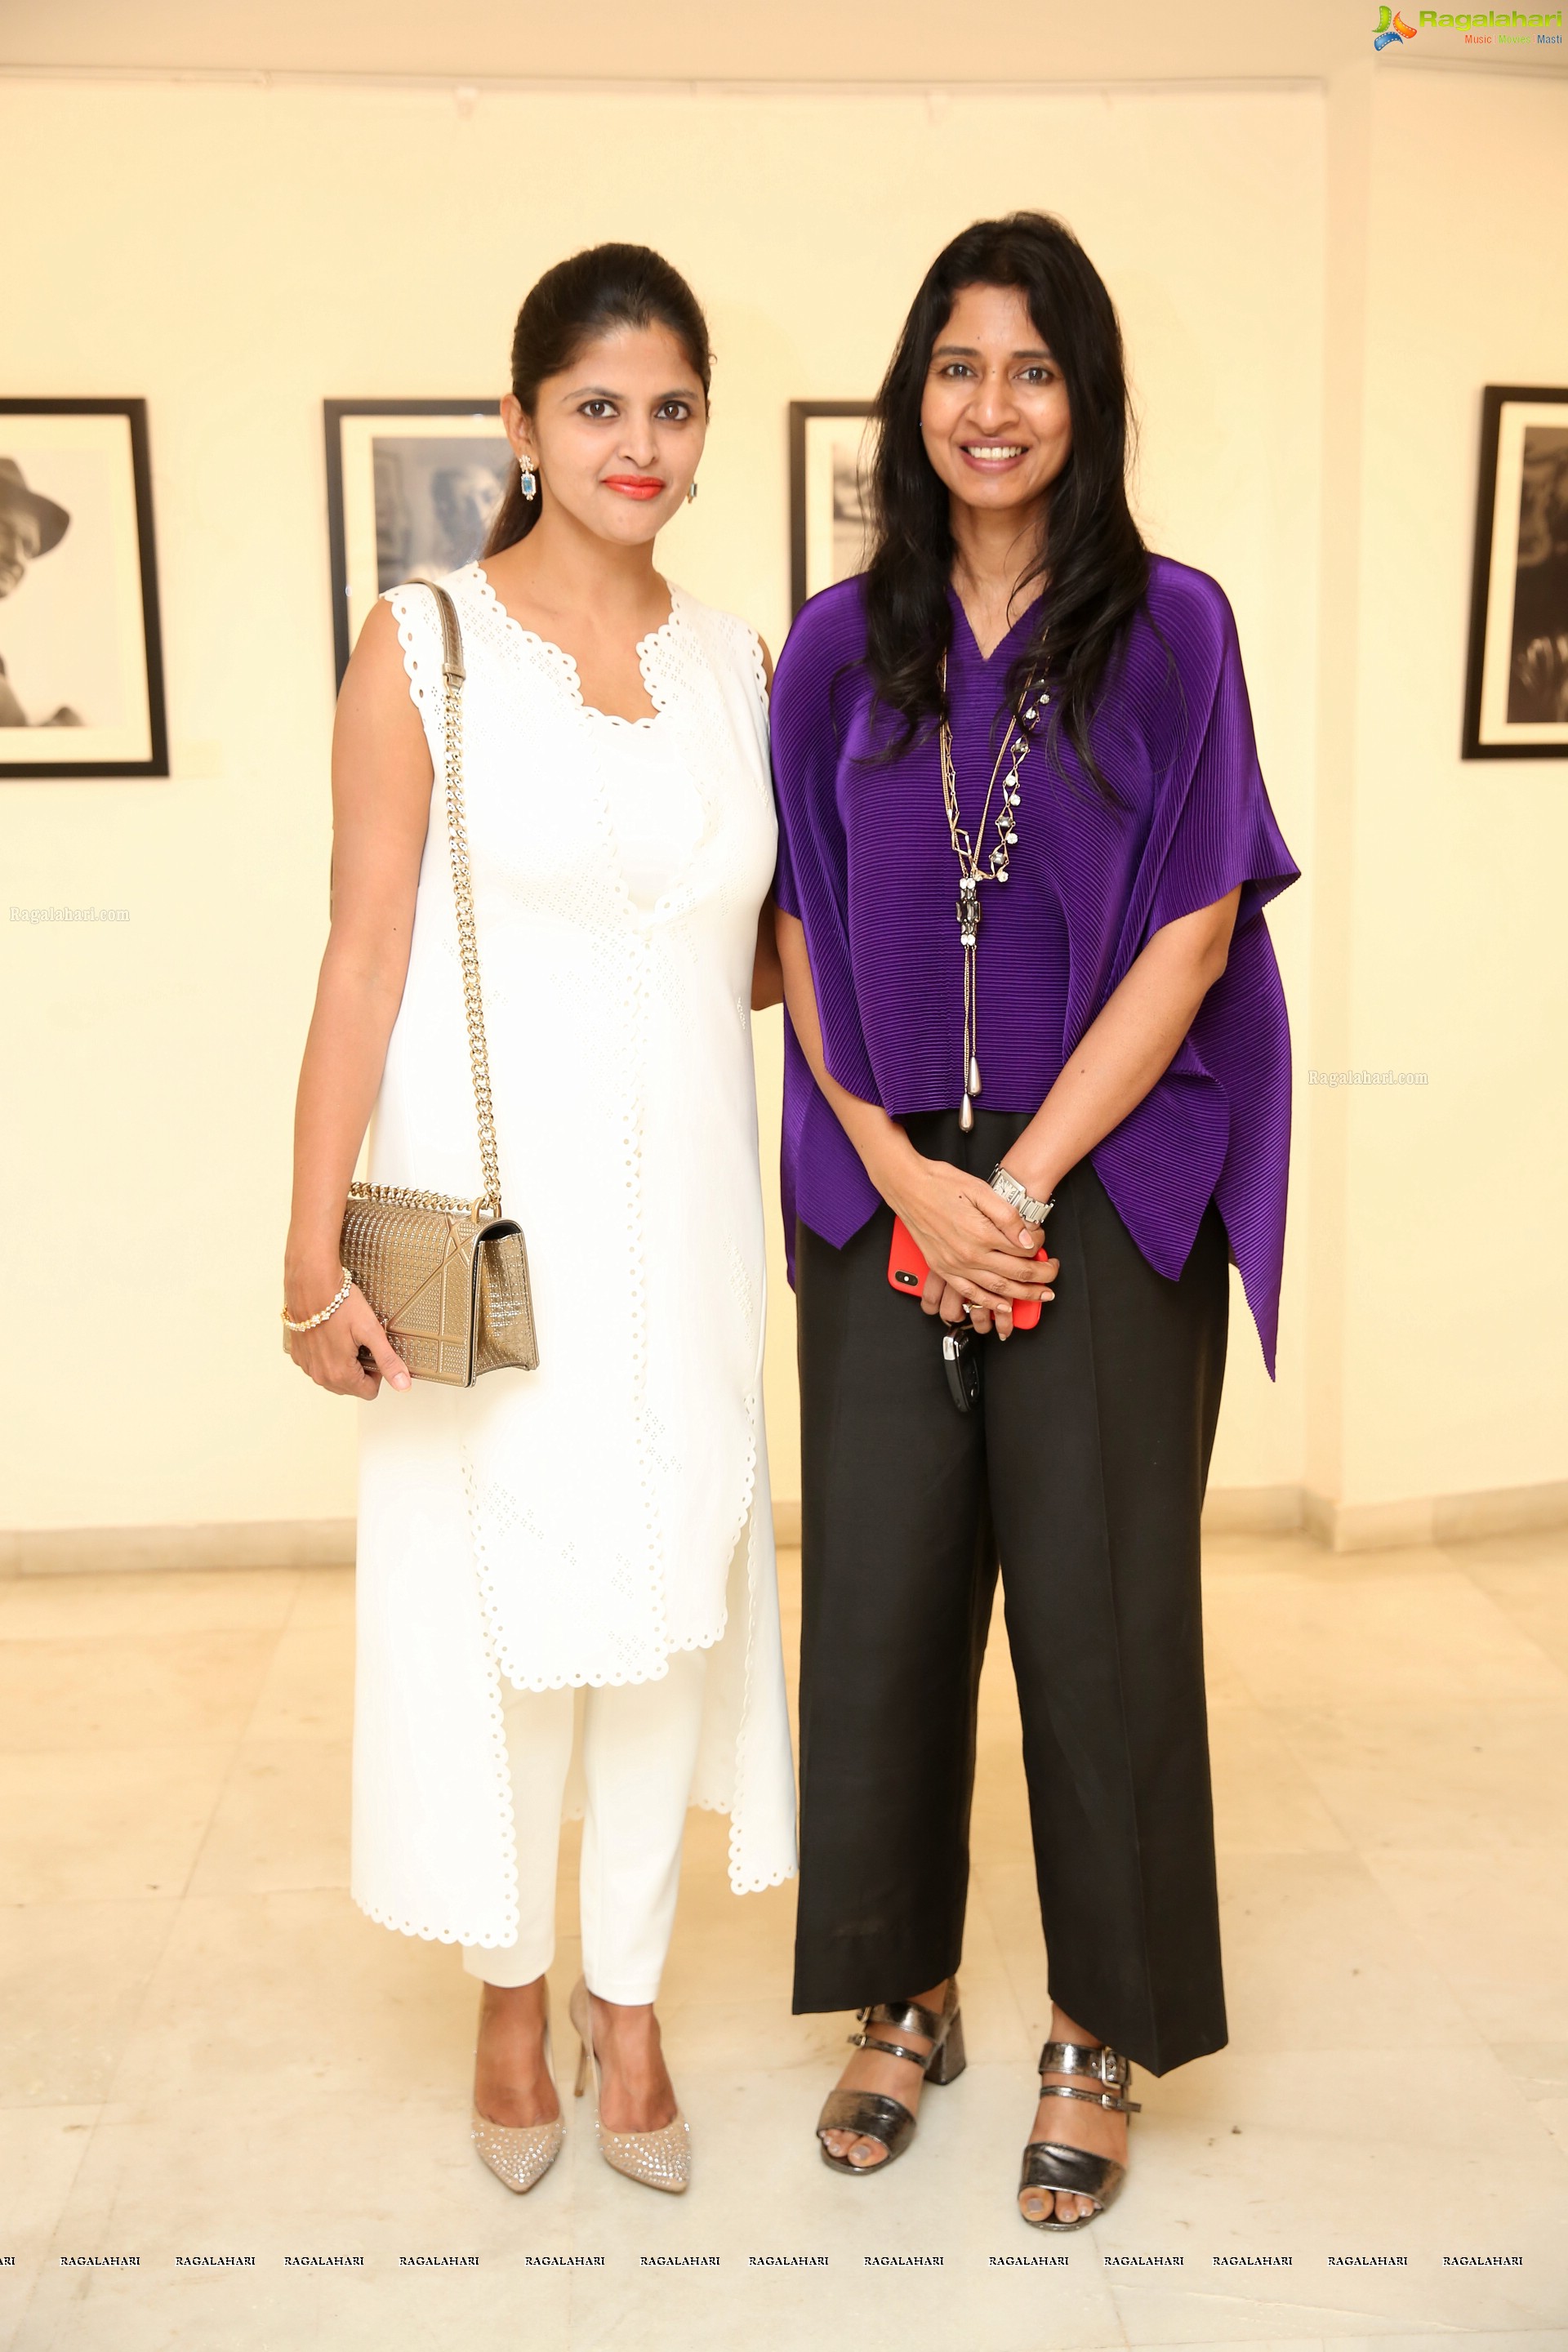 Shrishti Art Gallery Presents A Woman and her Camera - Photographs Exhibition